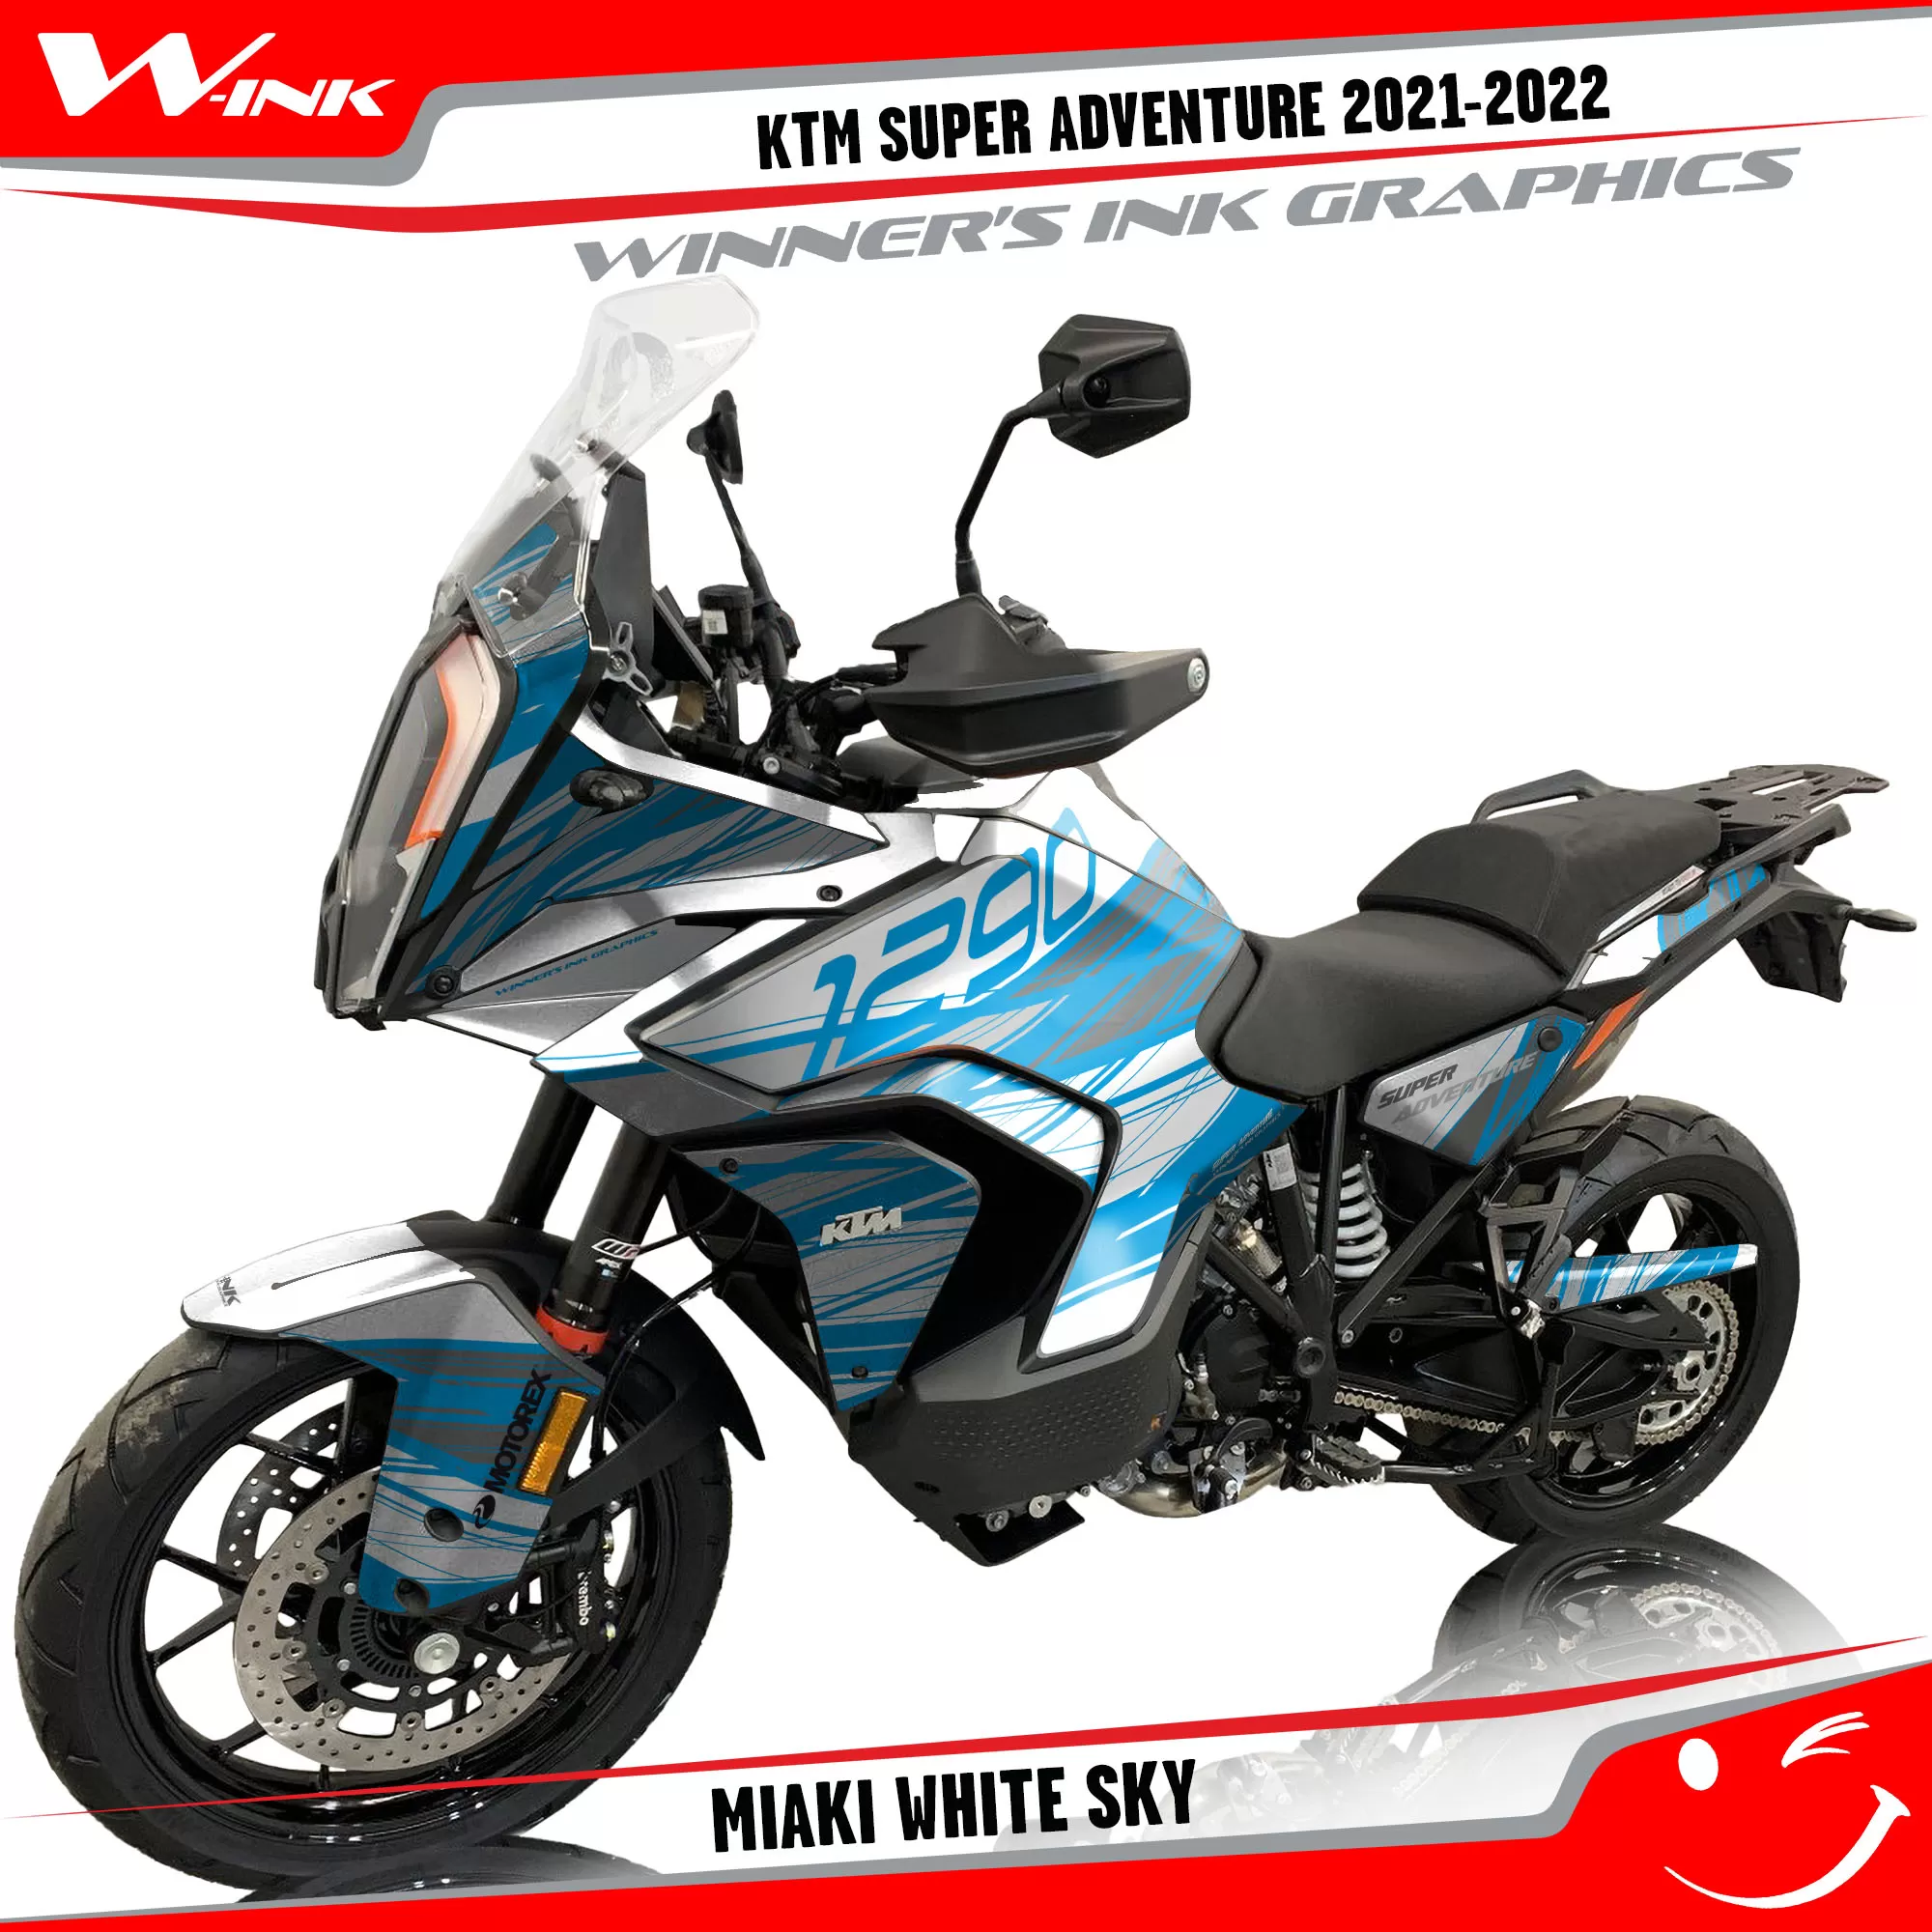 KTM-Super-Adventure-S-2021-2022-graphics-kit-and-decals-with-designs-Miaki-White-Sky